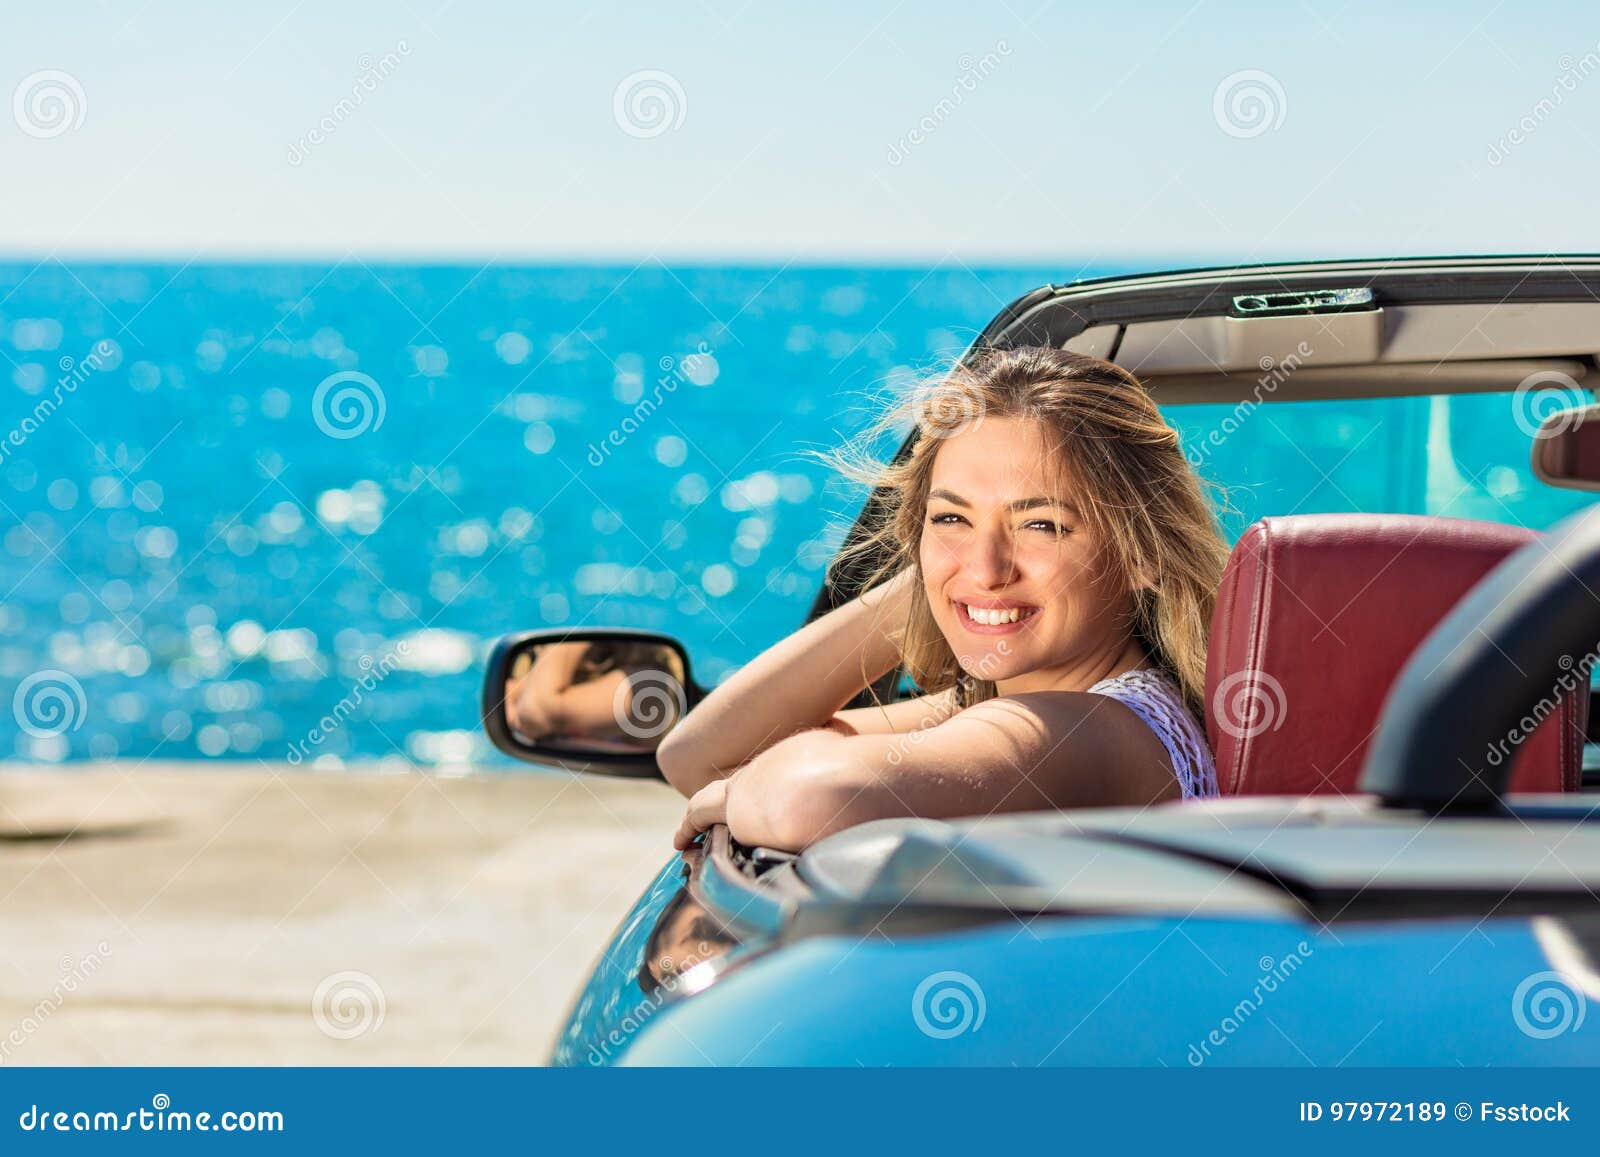 beautiful blond smiling young woman in convertible top automobile looking sideways while parked near ocean waterfront